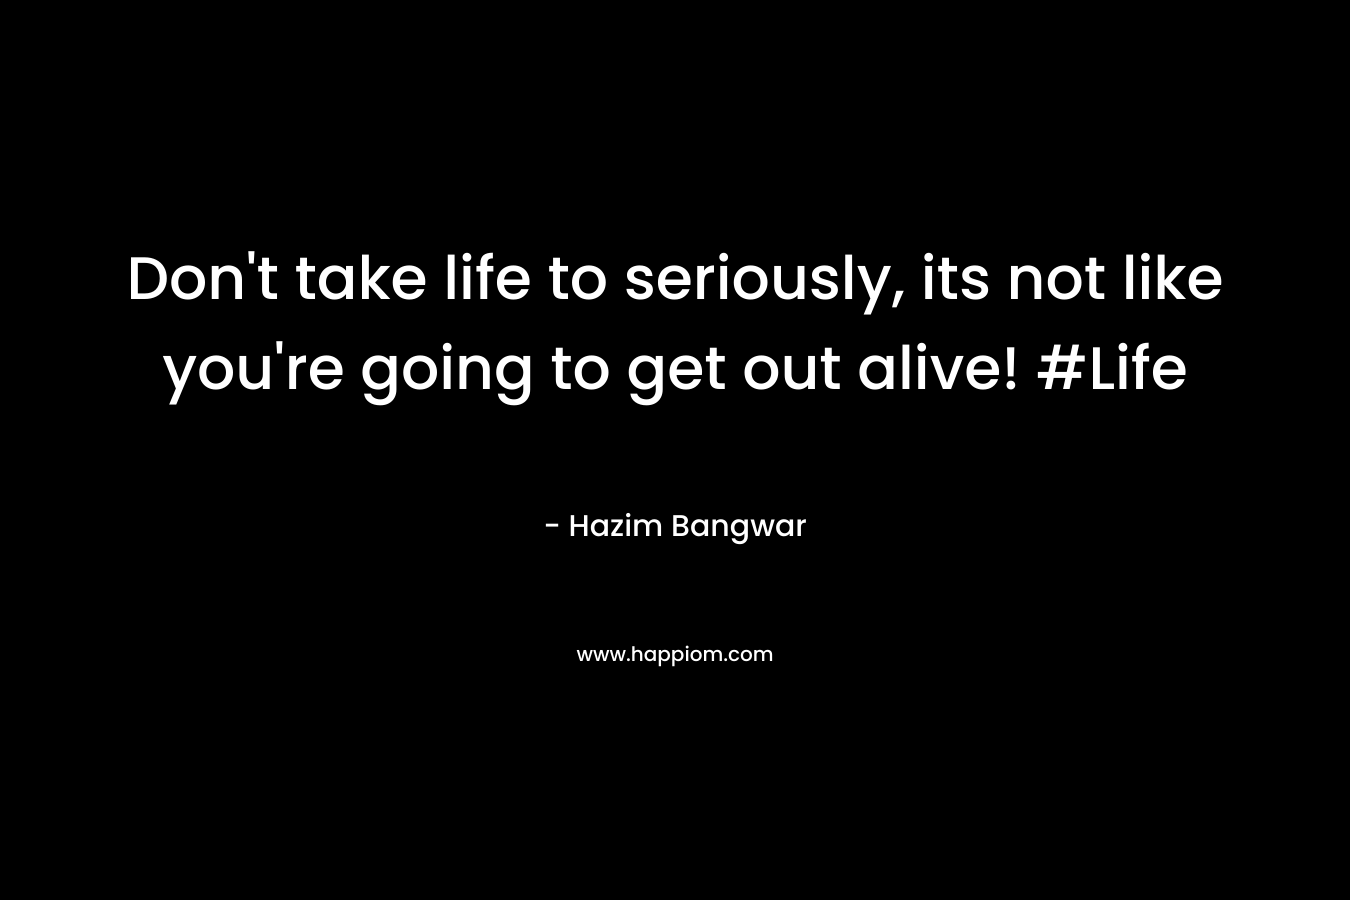 Don't take life to seriously, its not like you're going to get out alive! #Life